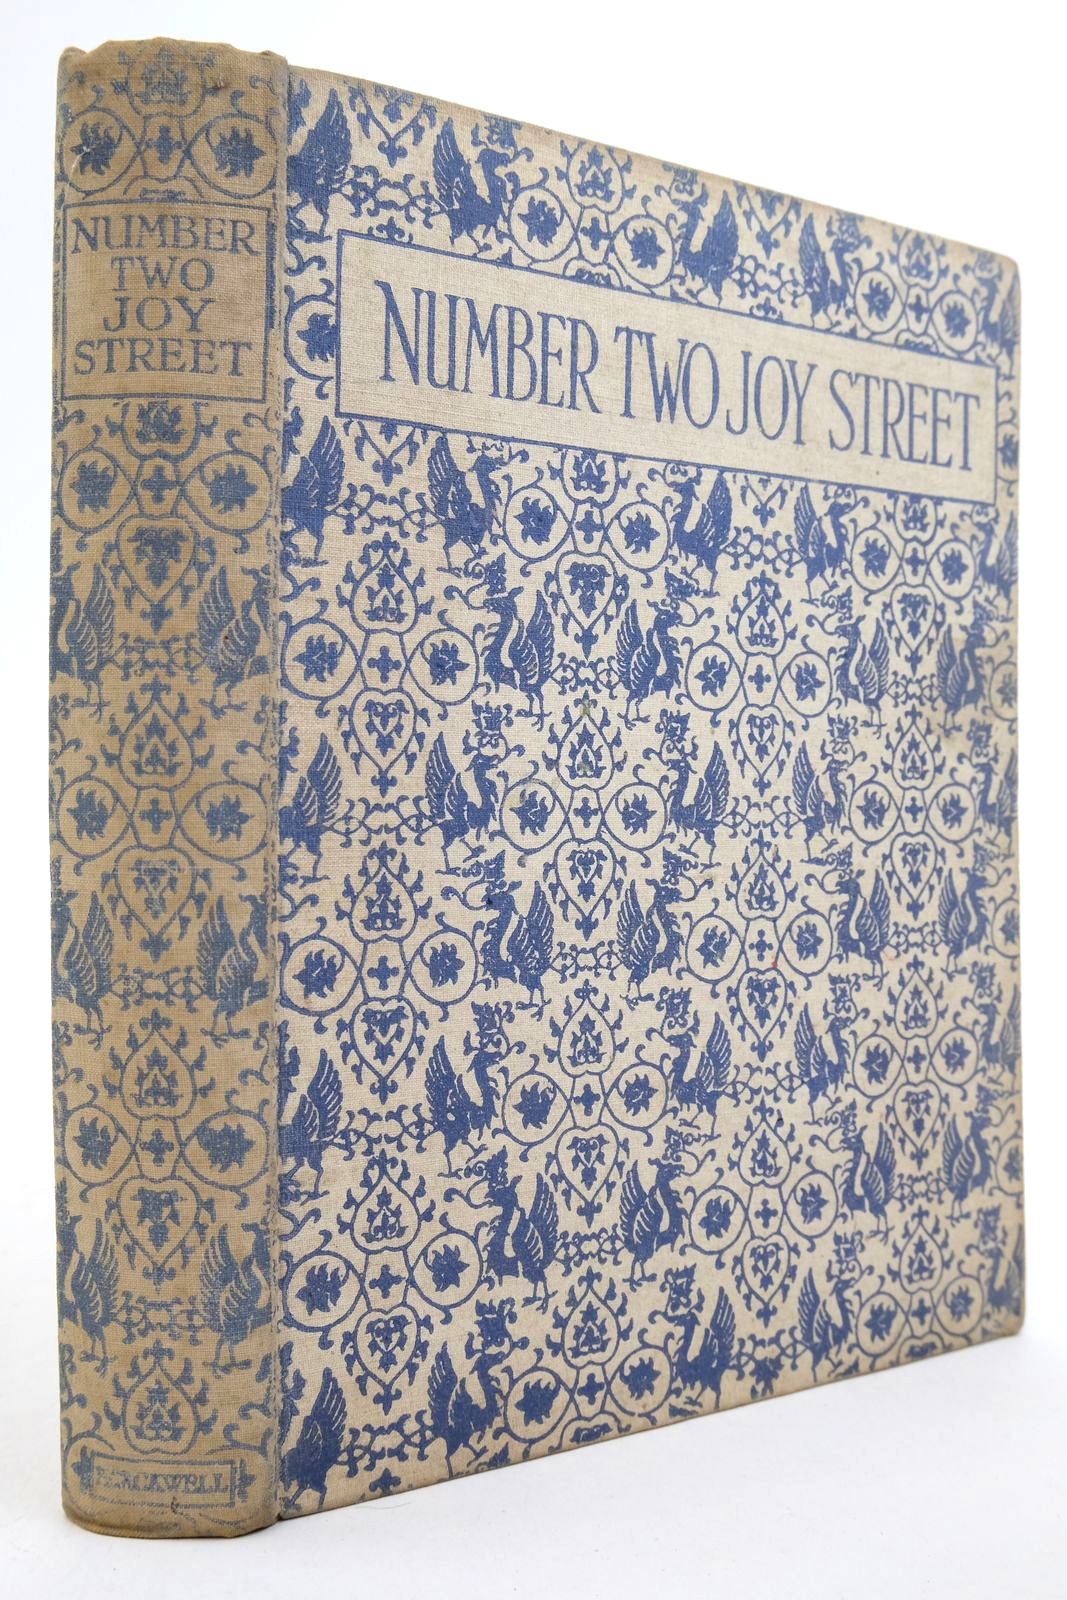 Photo of NUMBER TWO JOY STREET written by Milne, A.A. De La Mare, Walter Fyleman, Rose et al,  illustrated by Rountree, Harry Buckels, Alec Nightingale, C.T. et al.,  published by Basil Blackwell (STOCK CODE: 2140030)  for sale by Stella & Rose's Books